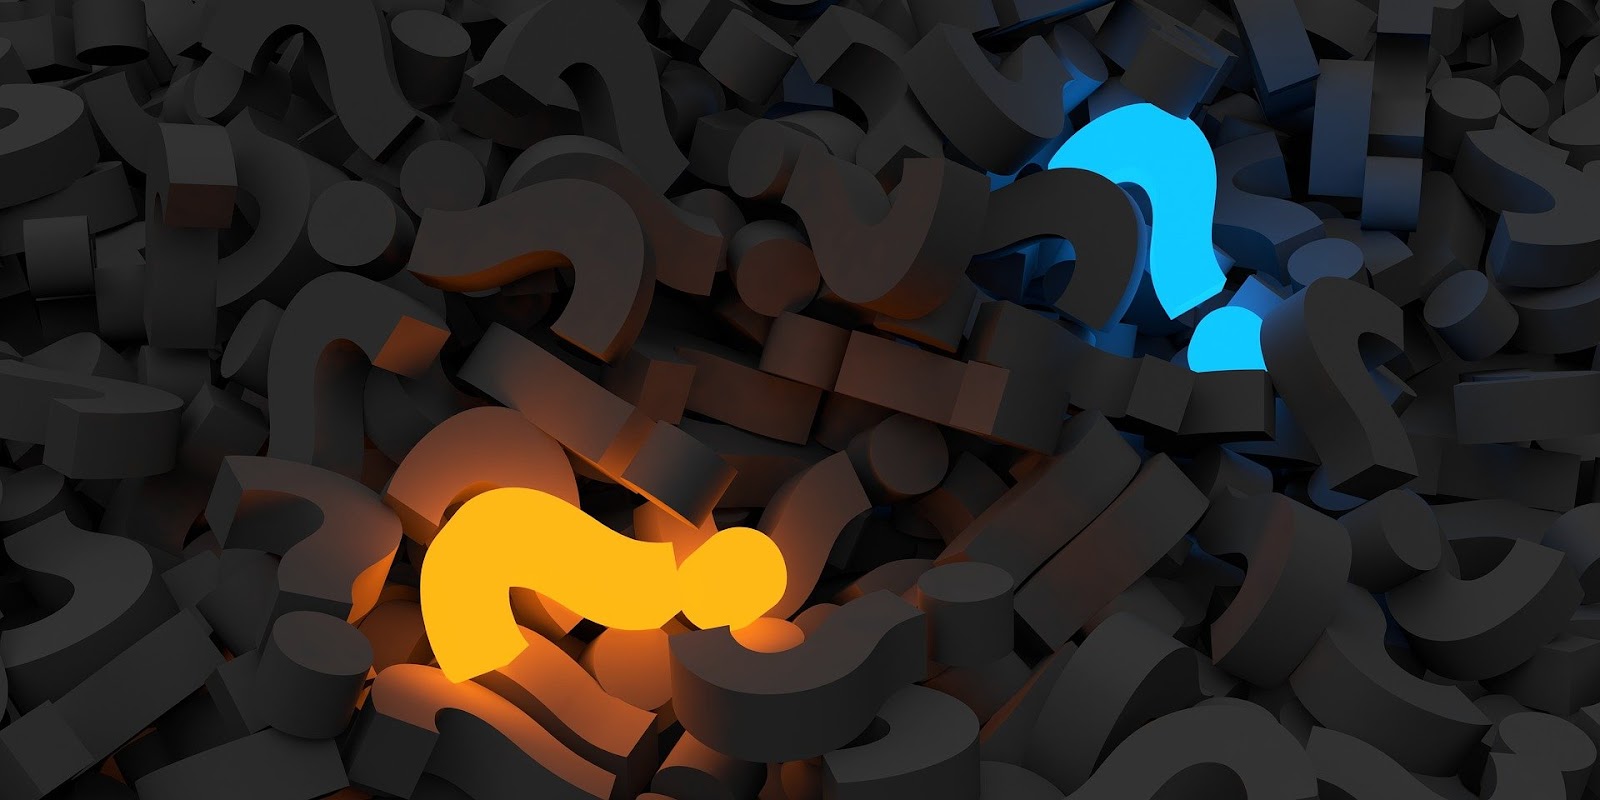 One blue and one orange question mark among several black question marks to symbolize differences between traditional and high risk merchant account